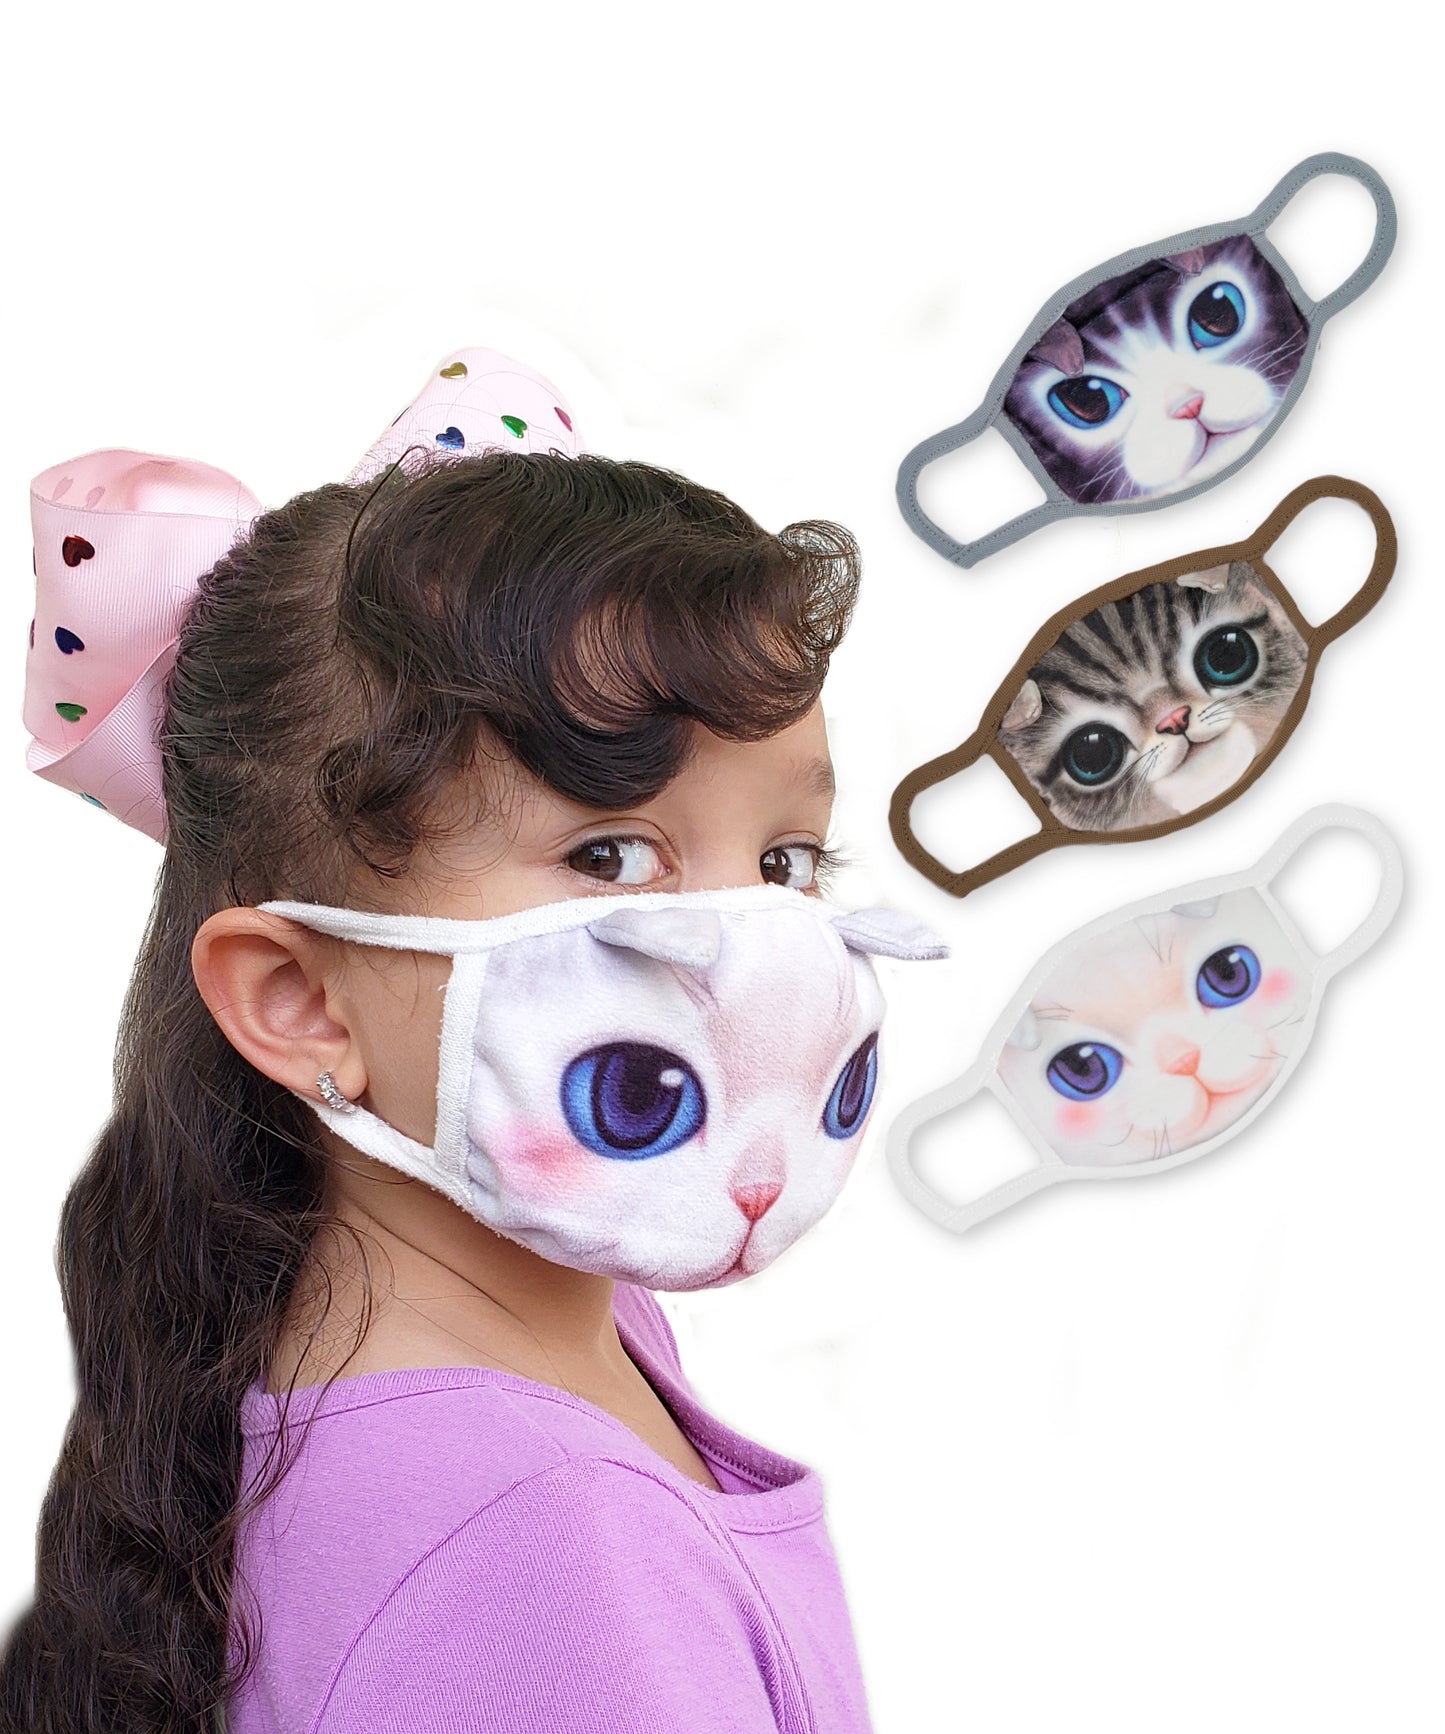 White, Gray, & Blue Eyes Doll Face Kitty Fabric Mask Set of 3